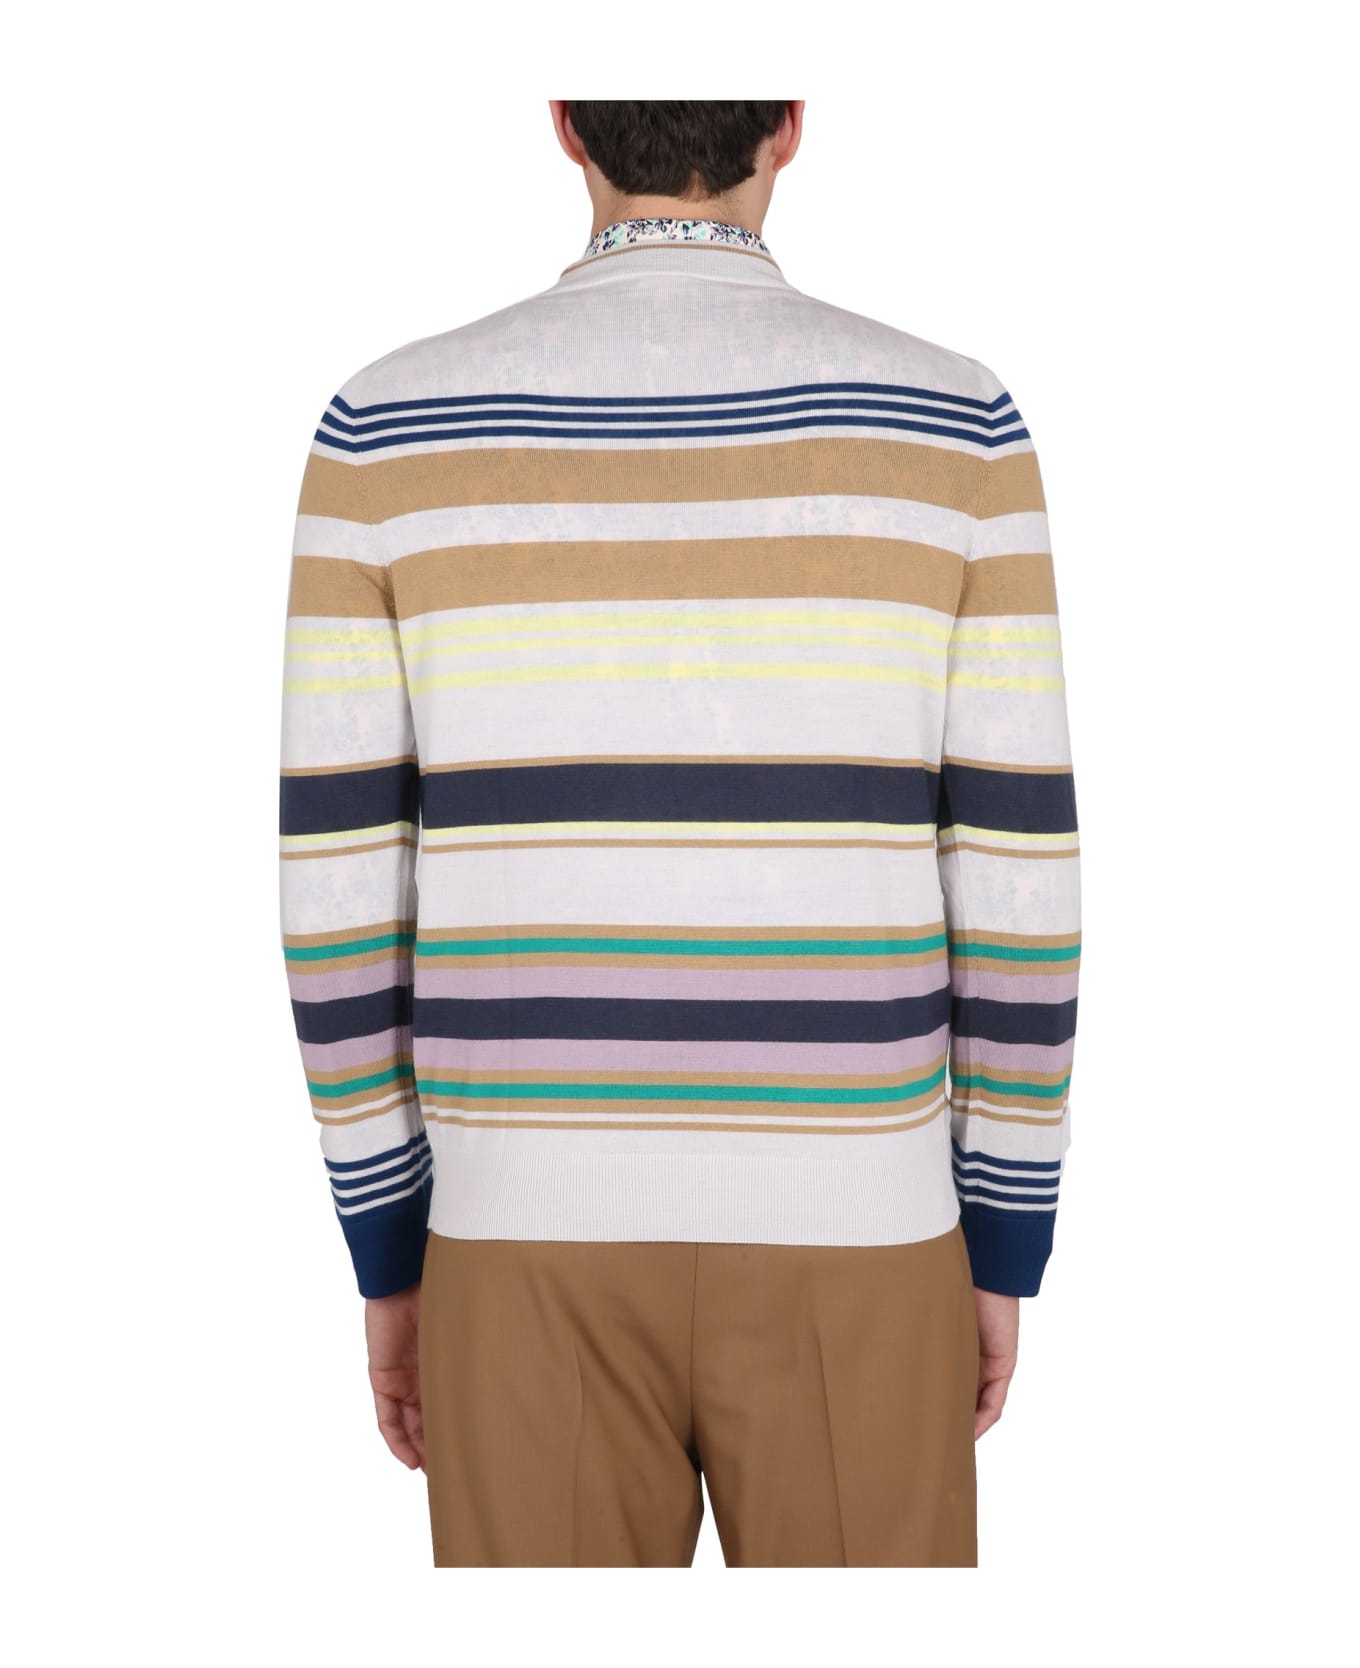 Paul Smith Jersey With Stripe Pattern - MULTICOLOR